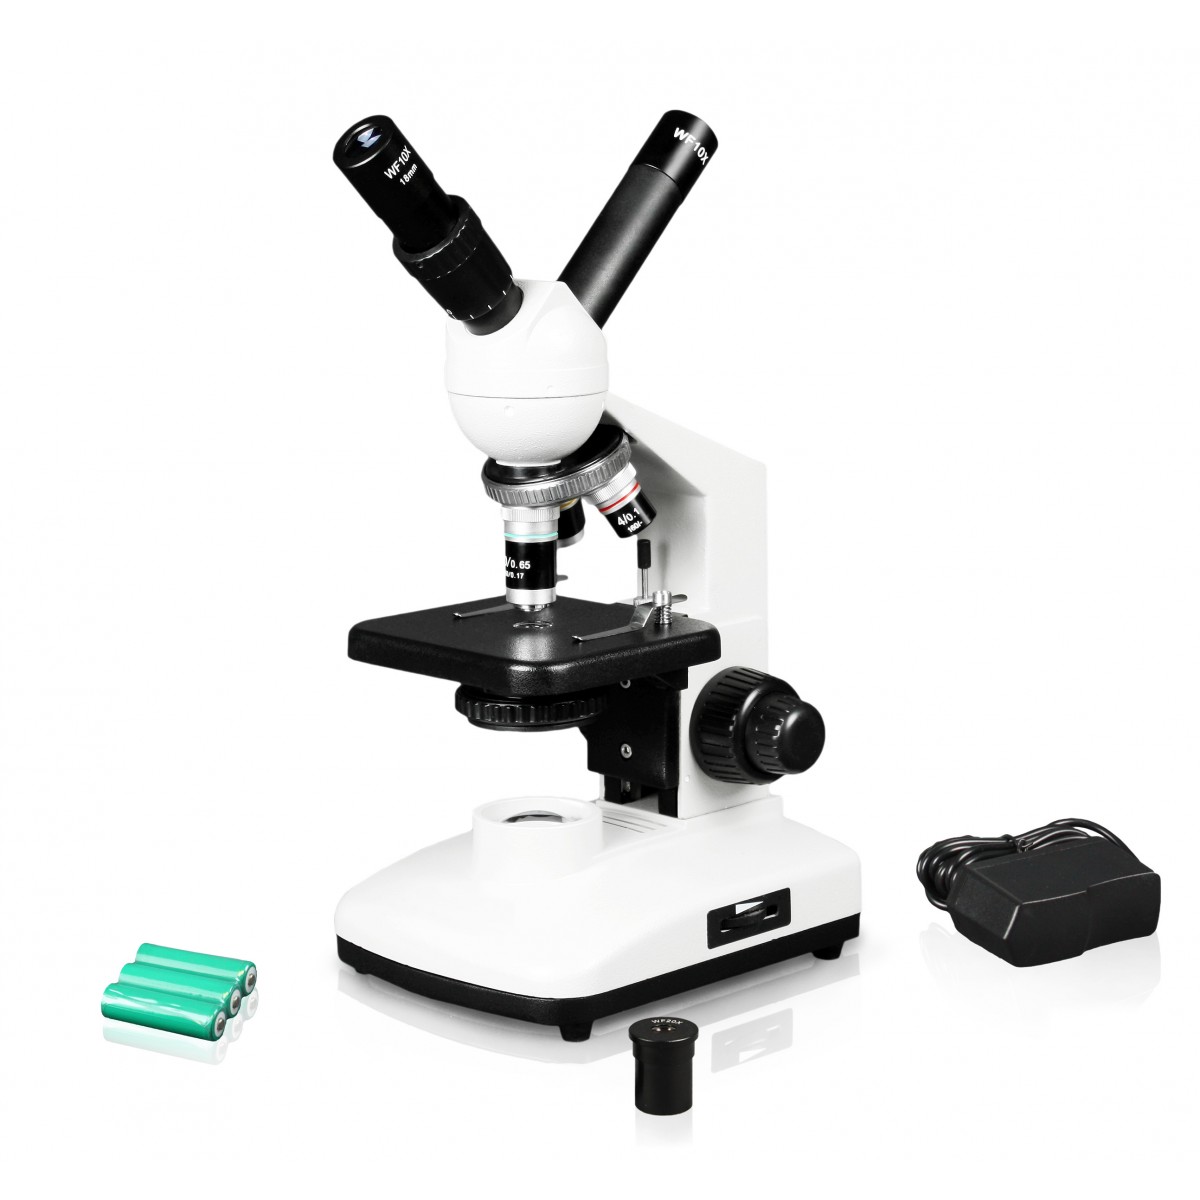 Vision Scientific VME0020-E3-MS2 Student LED Microscope 40x-1000x Magnification 10x WF and 25x WF Eyepiece Coarse and Fine Focus LED Illumination with Light Intensity Control Mechanical Stage 